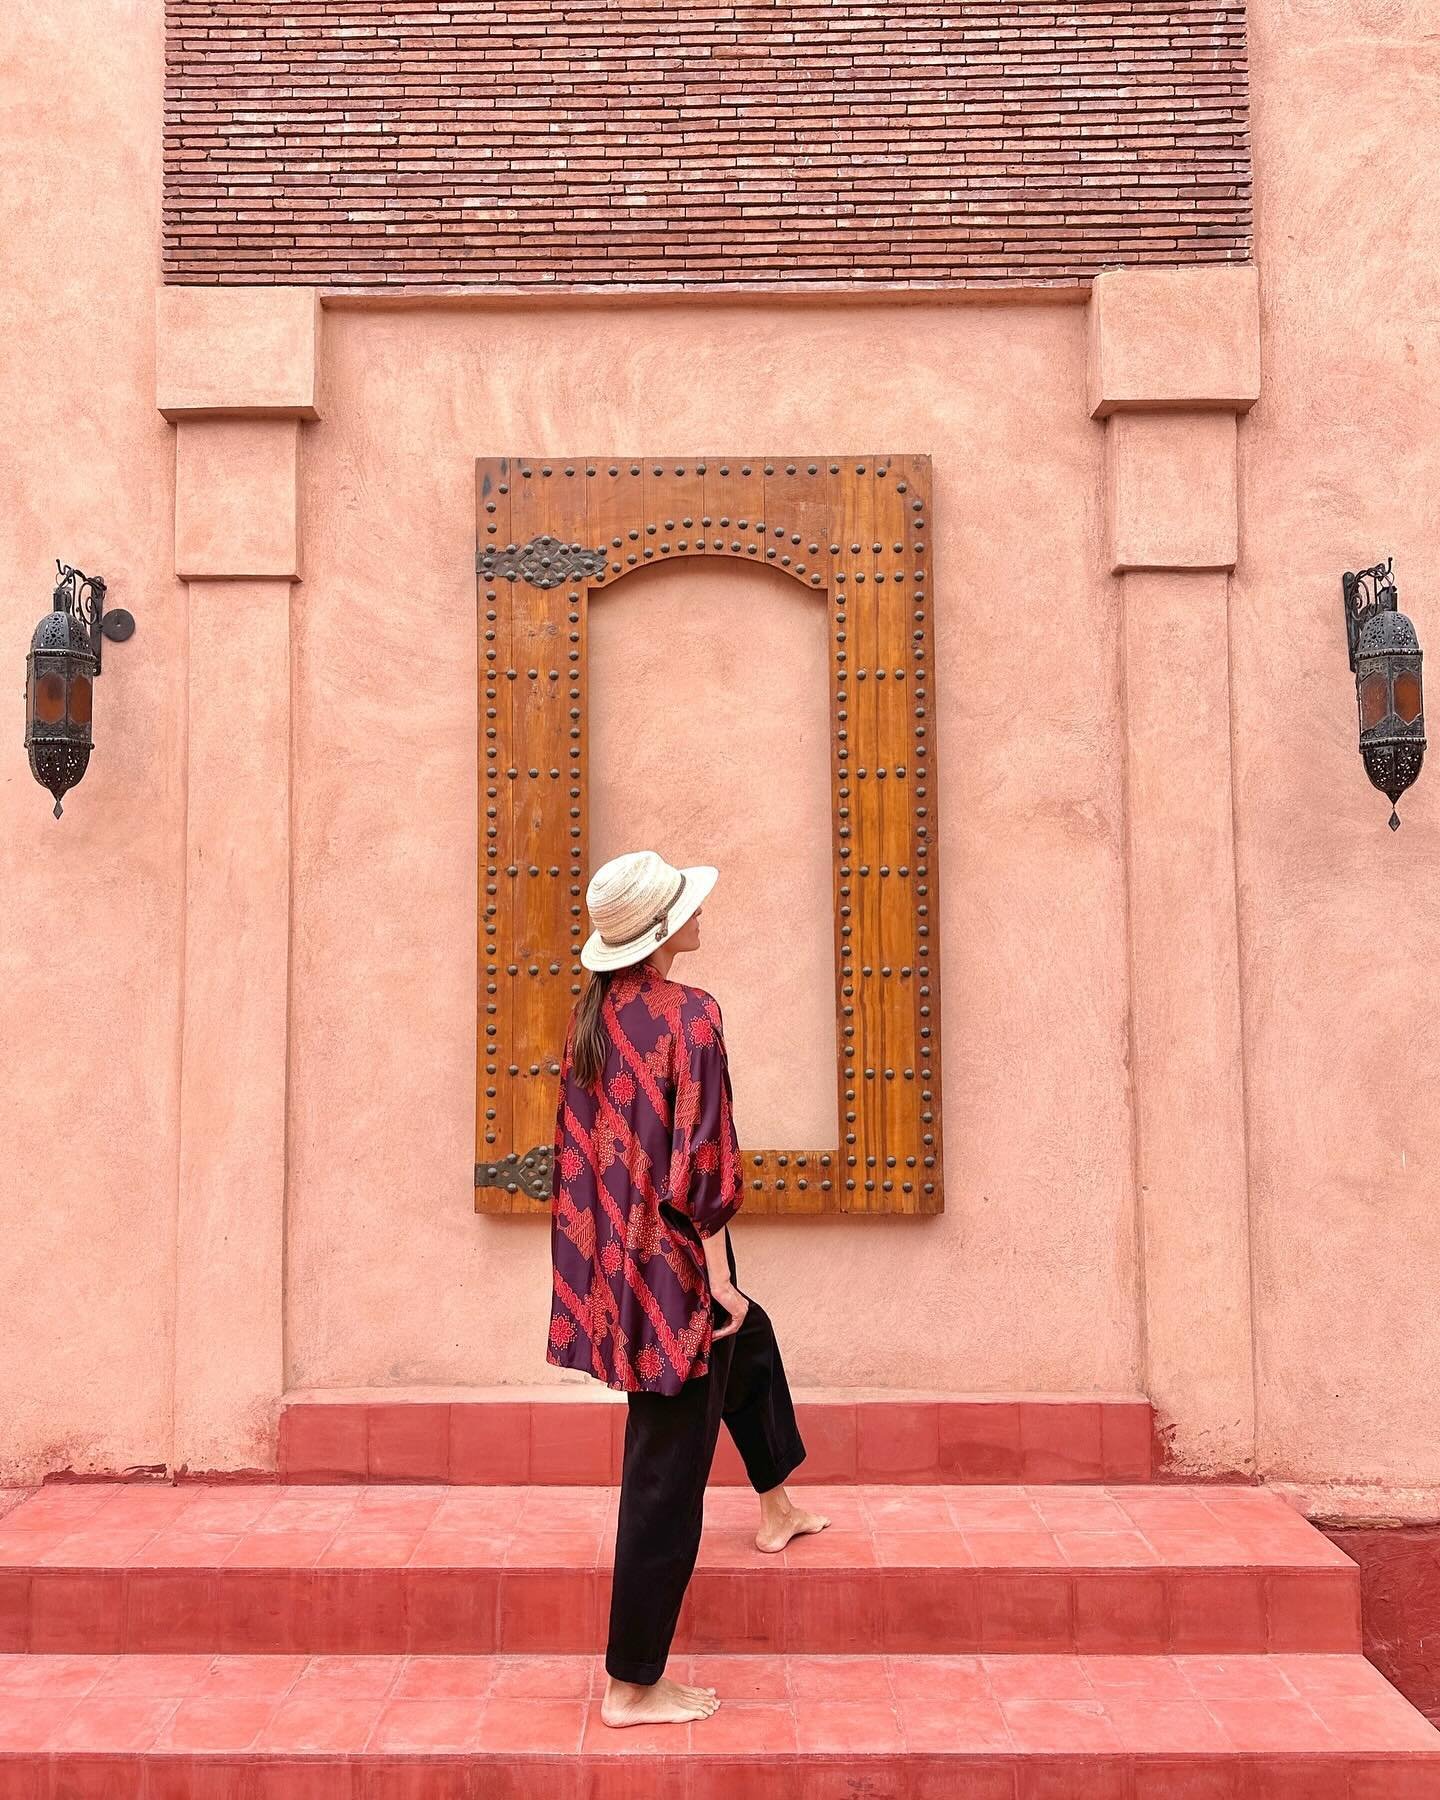 Transport yourself to the vibrant hues of Morocco with Oasi 🌅 

Embrace the warmth of the desert sun and immerse yourself in the rich, fiery tones of Moroccan landscapes🔥 #OasiKimono #MoroccanInspiration

.
.
.
.
.
.
.
.
.
#originofhearts #ooh #fes